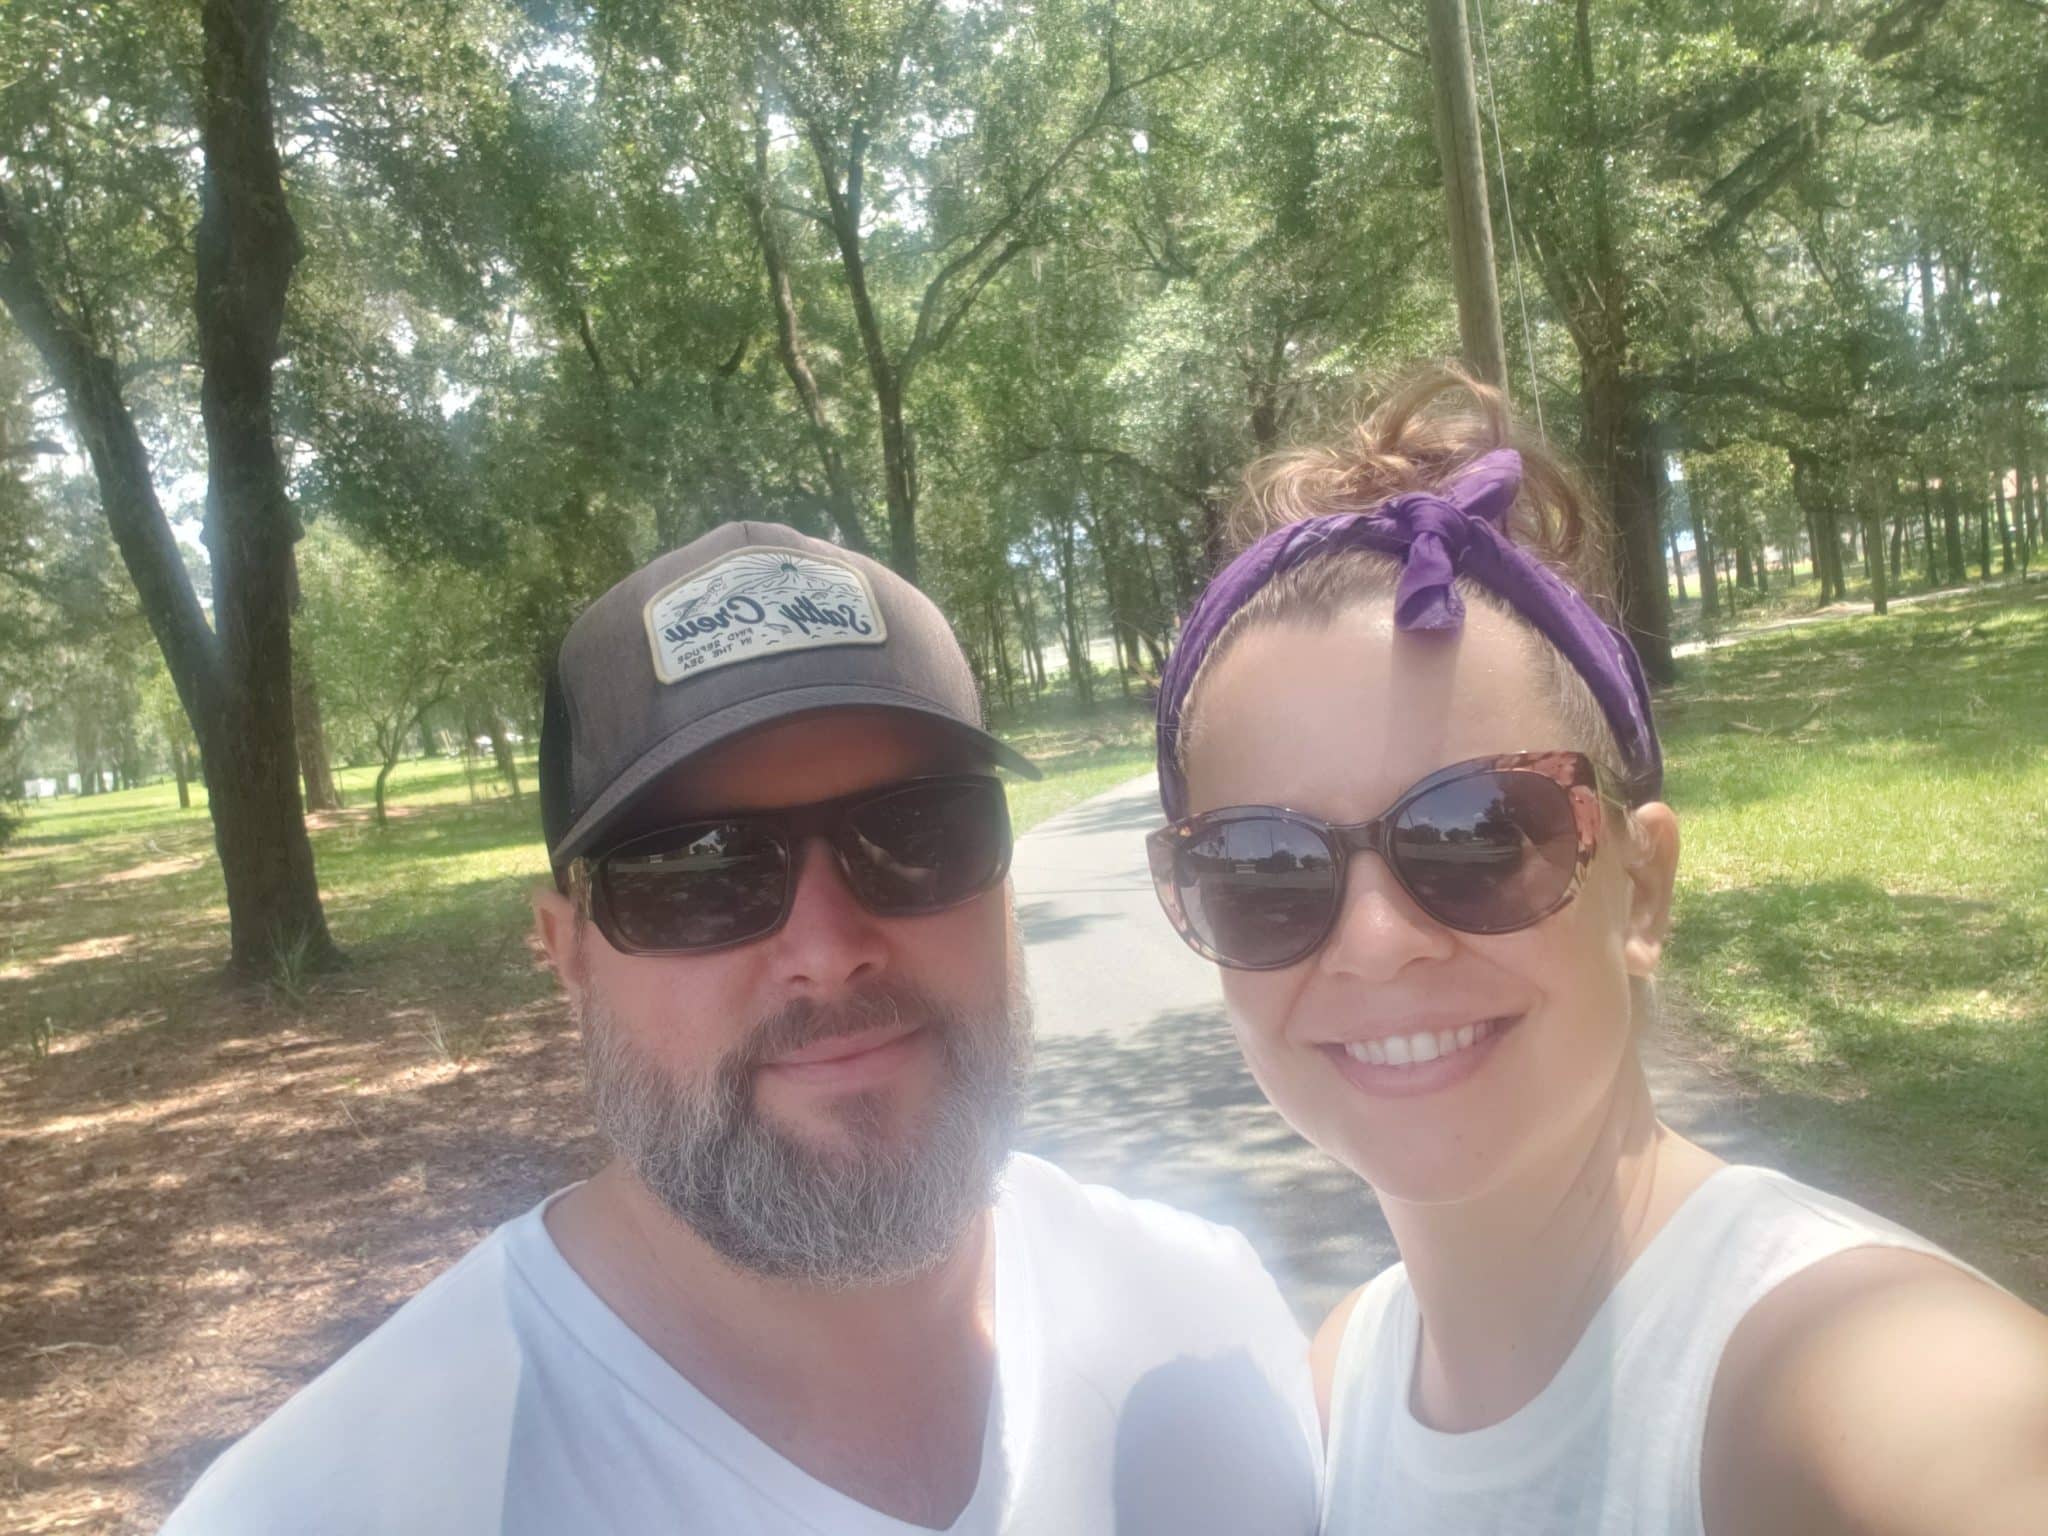 man and woman wearing white shirts and sunglasses out doors take selfie on nature path